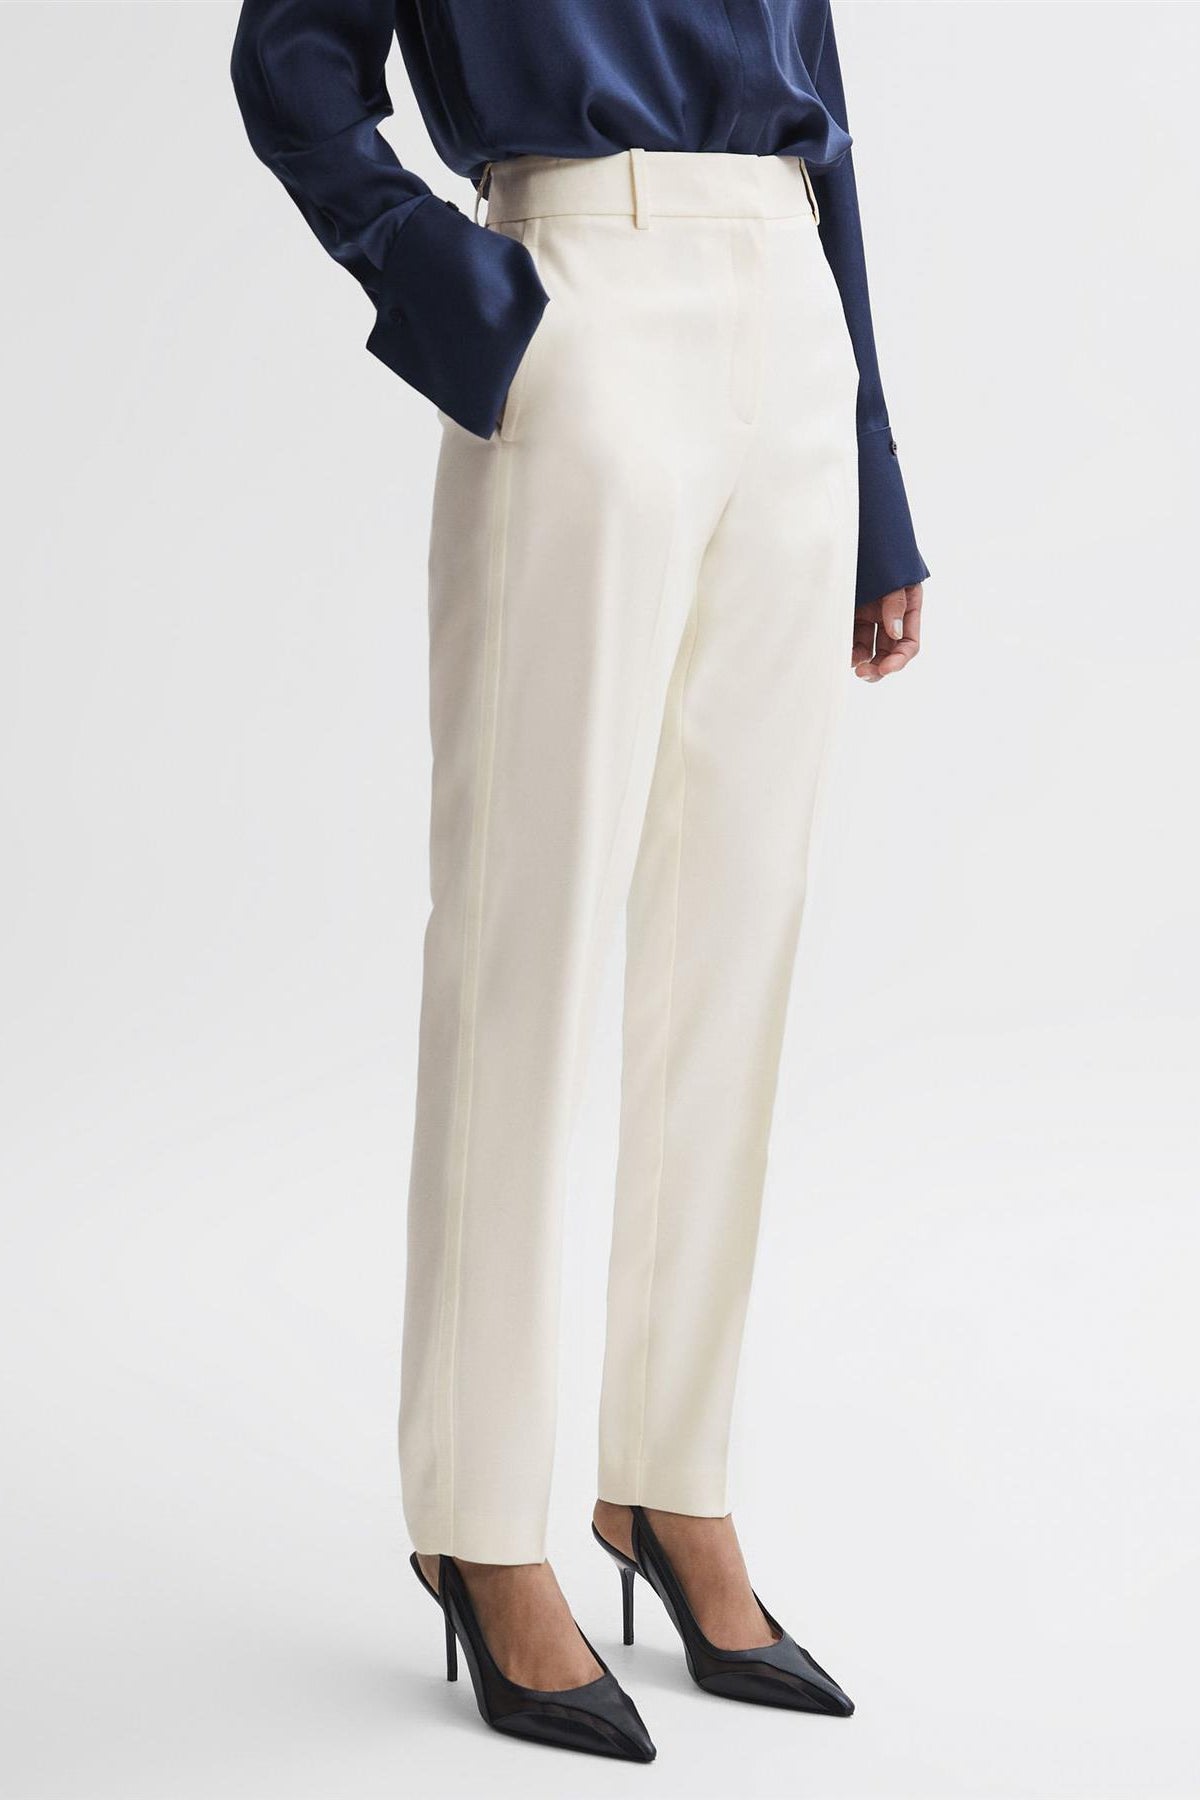 Dunnes Stores  White Pull On Stretch Crop Trousers